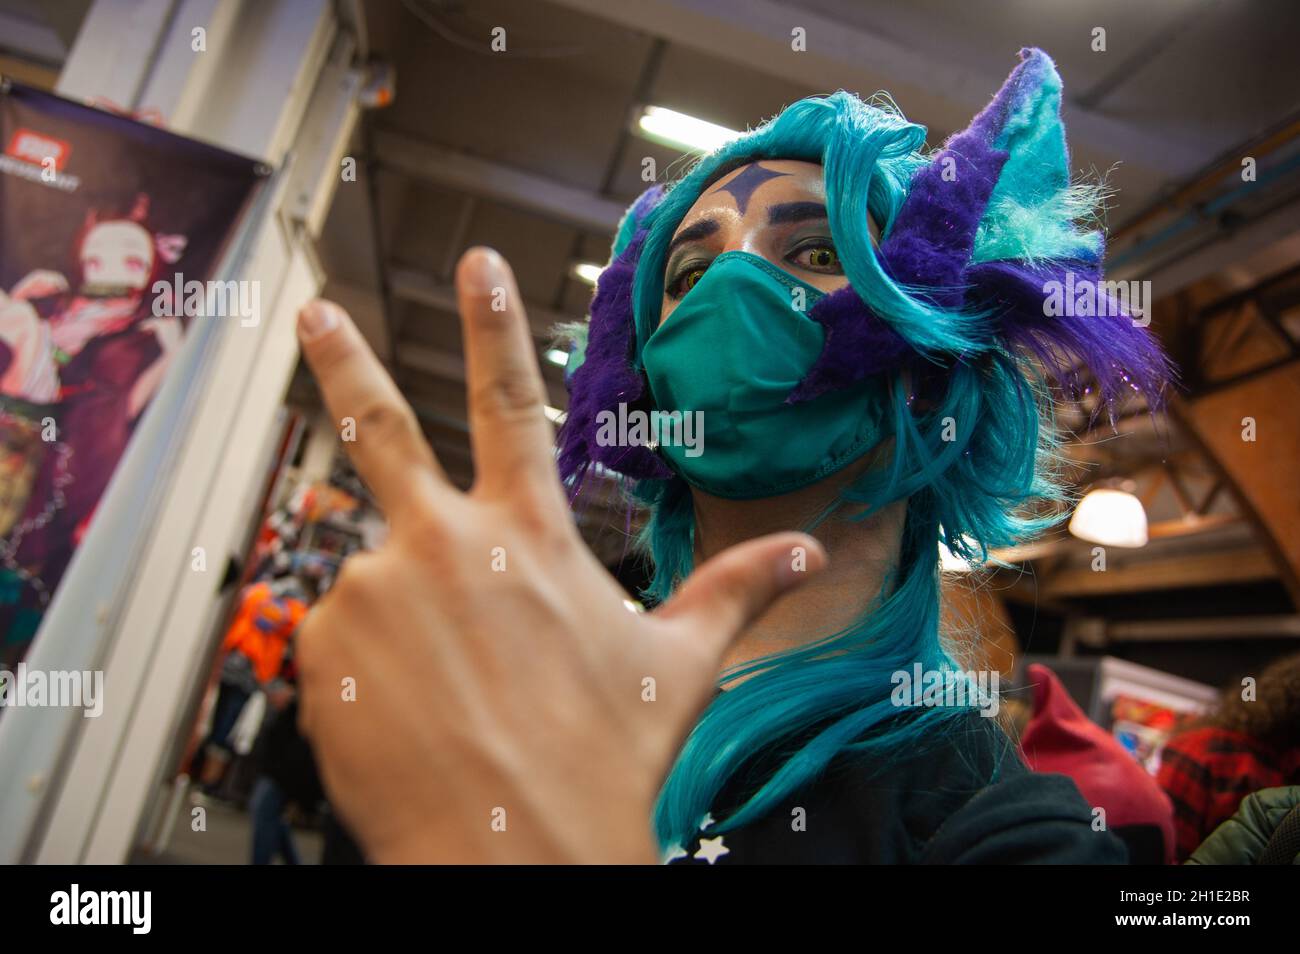 Cosplayers use costumes of League of Legends game characters during the first day of the SOFA (Salon del Ocio y la Fantasia) 2021, a fair aimed to the Stock Photo